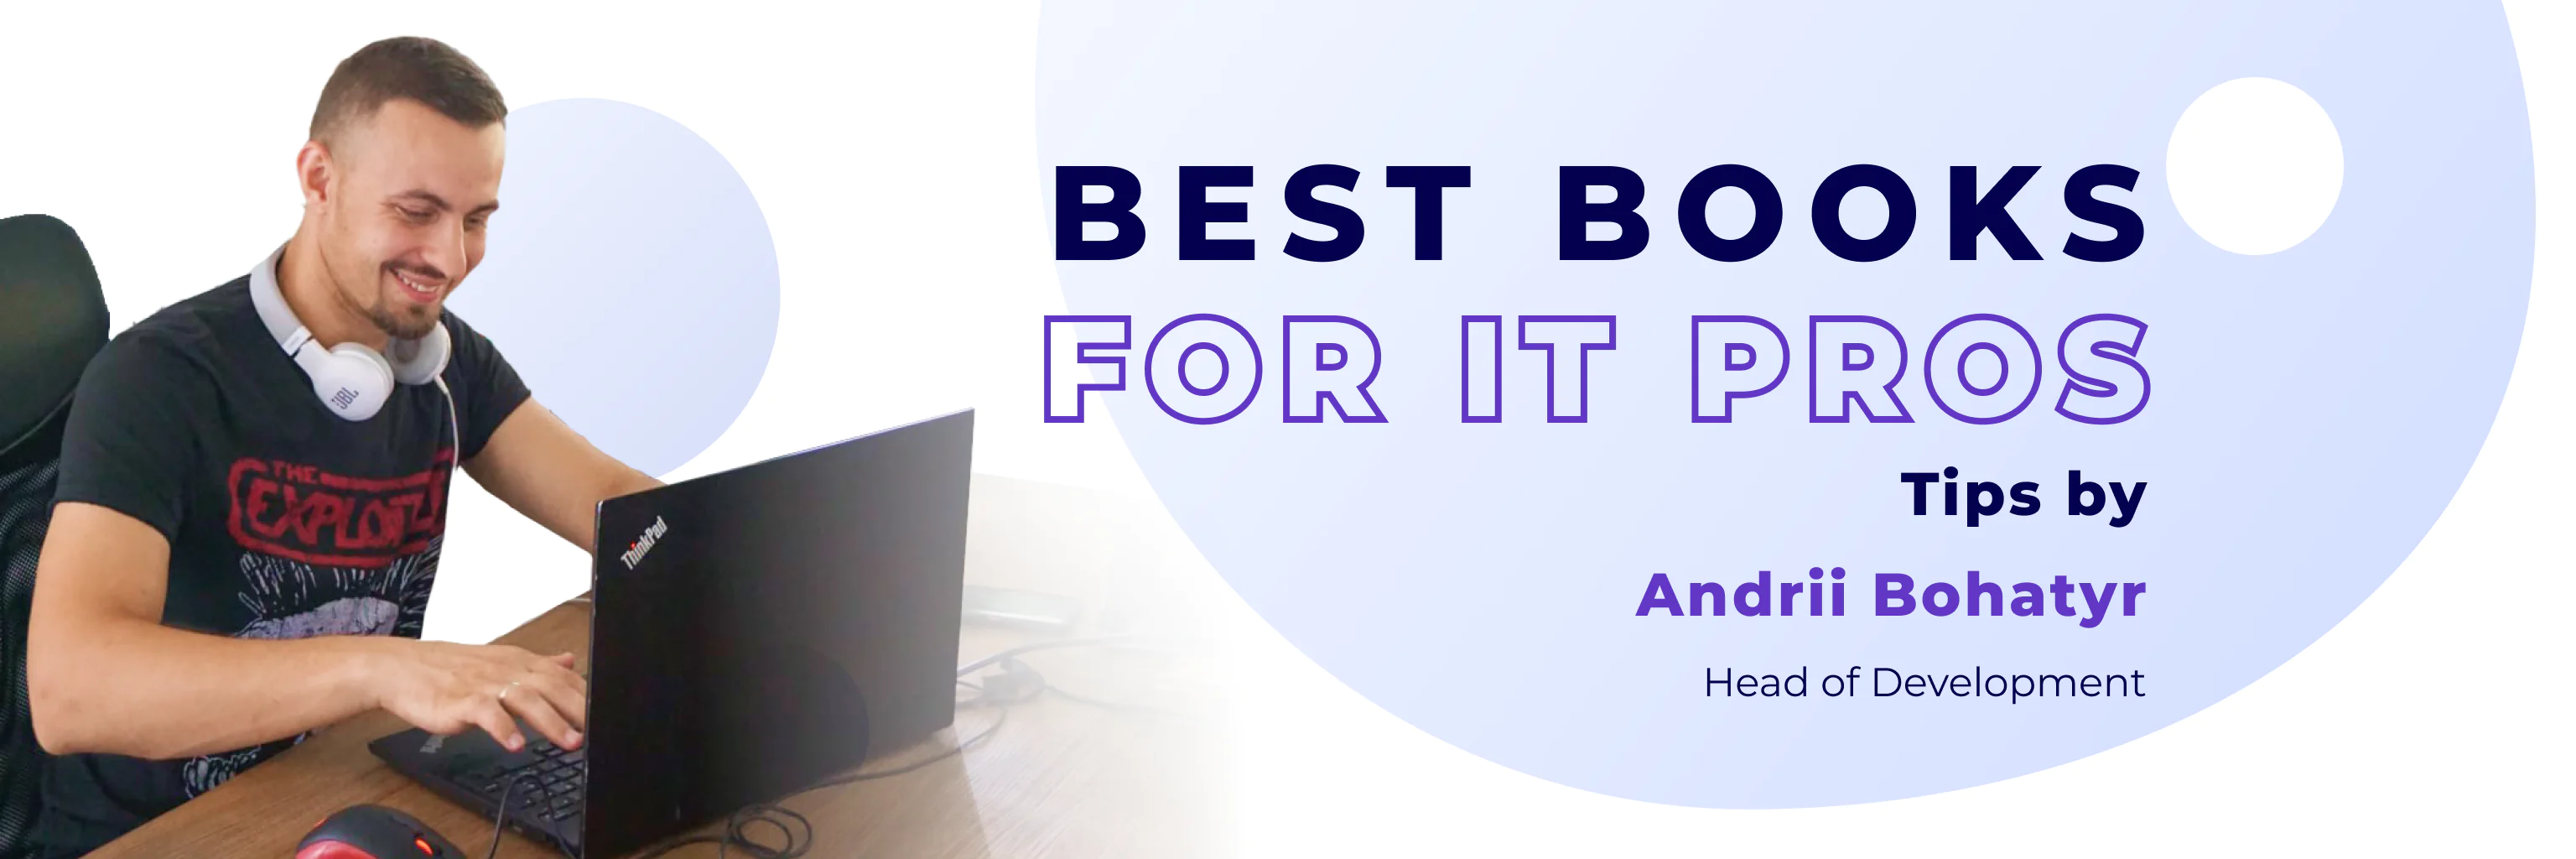 Best books for programmers recommended by Andrii Bohatyr